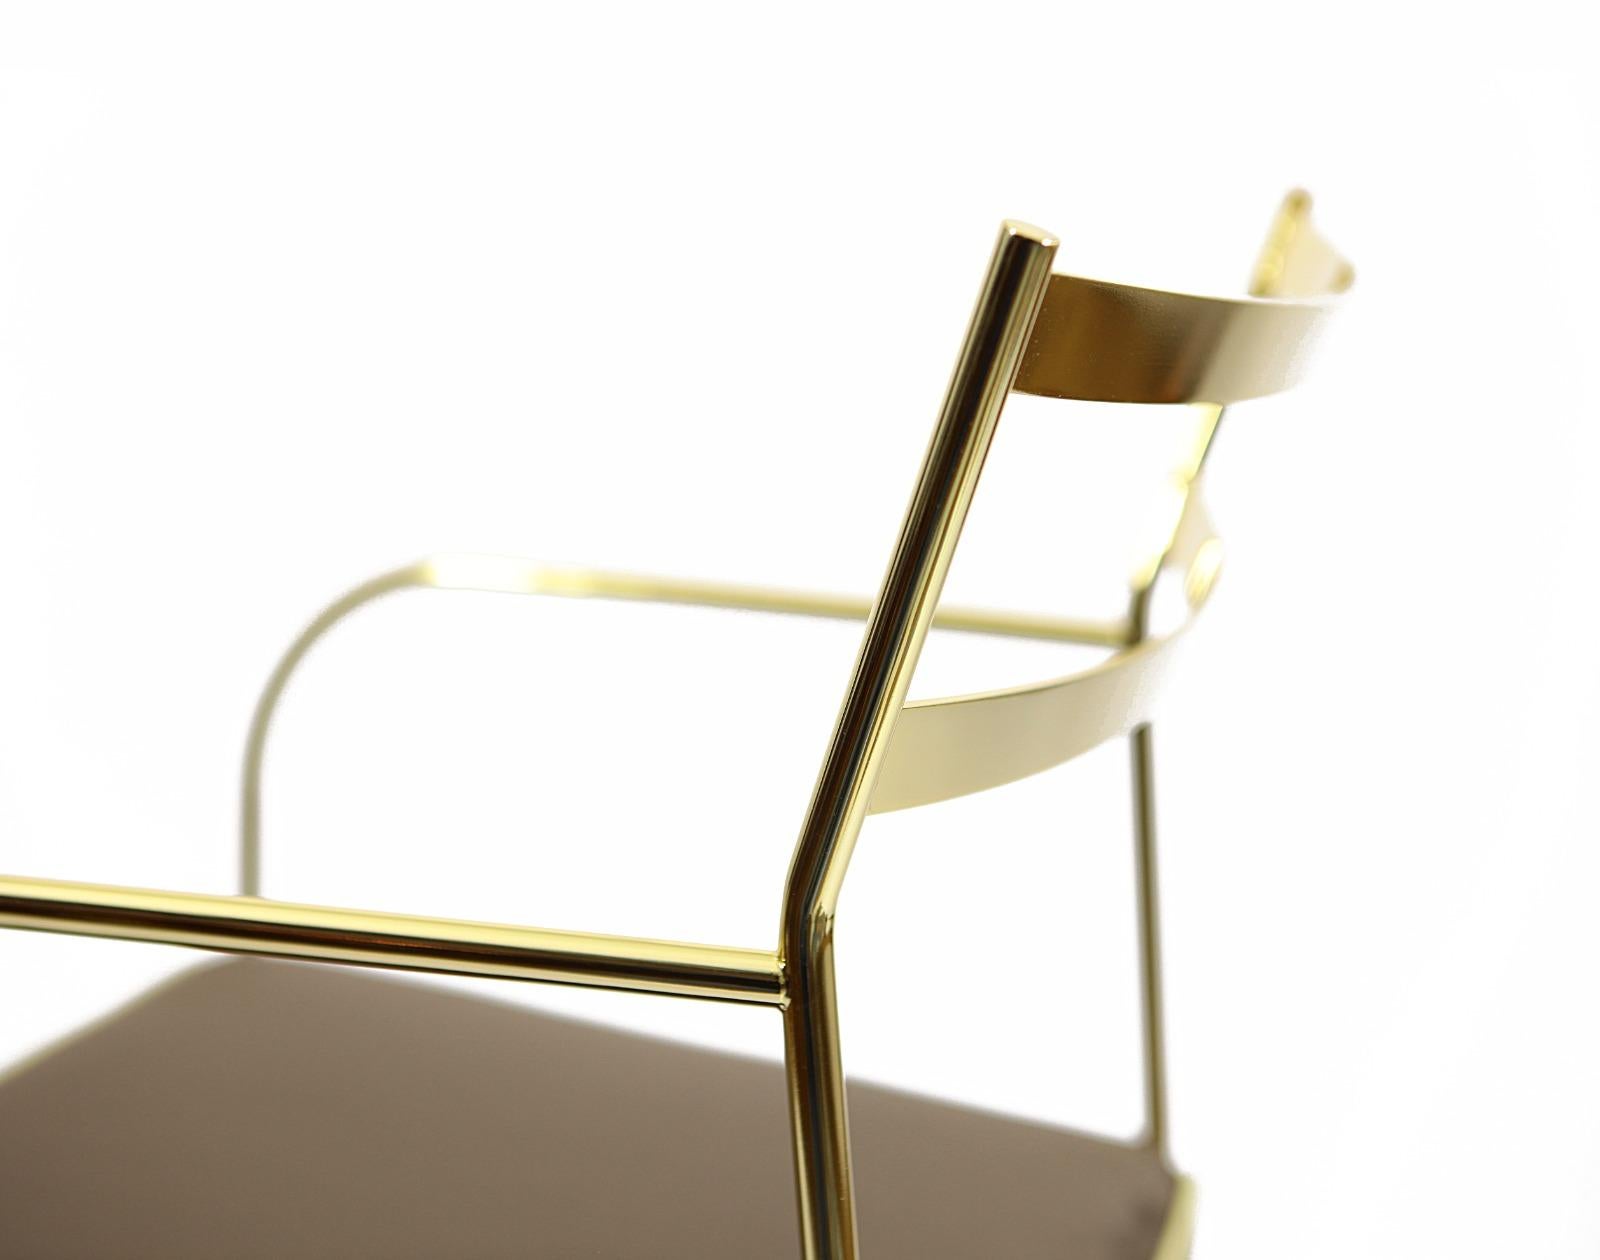 This unique chair has an iron structure covered with a 24-karat gold flash plating, and elegant galvanized brass feet.  The seats are covered in cotton velvet  and decorated with an elegant yellow piping all around the edges